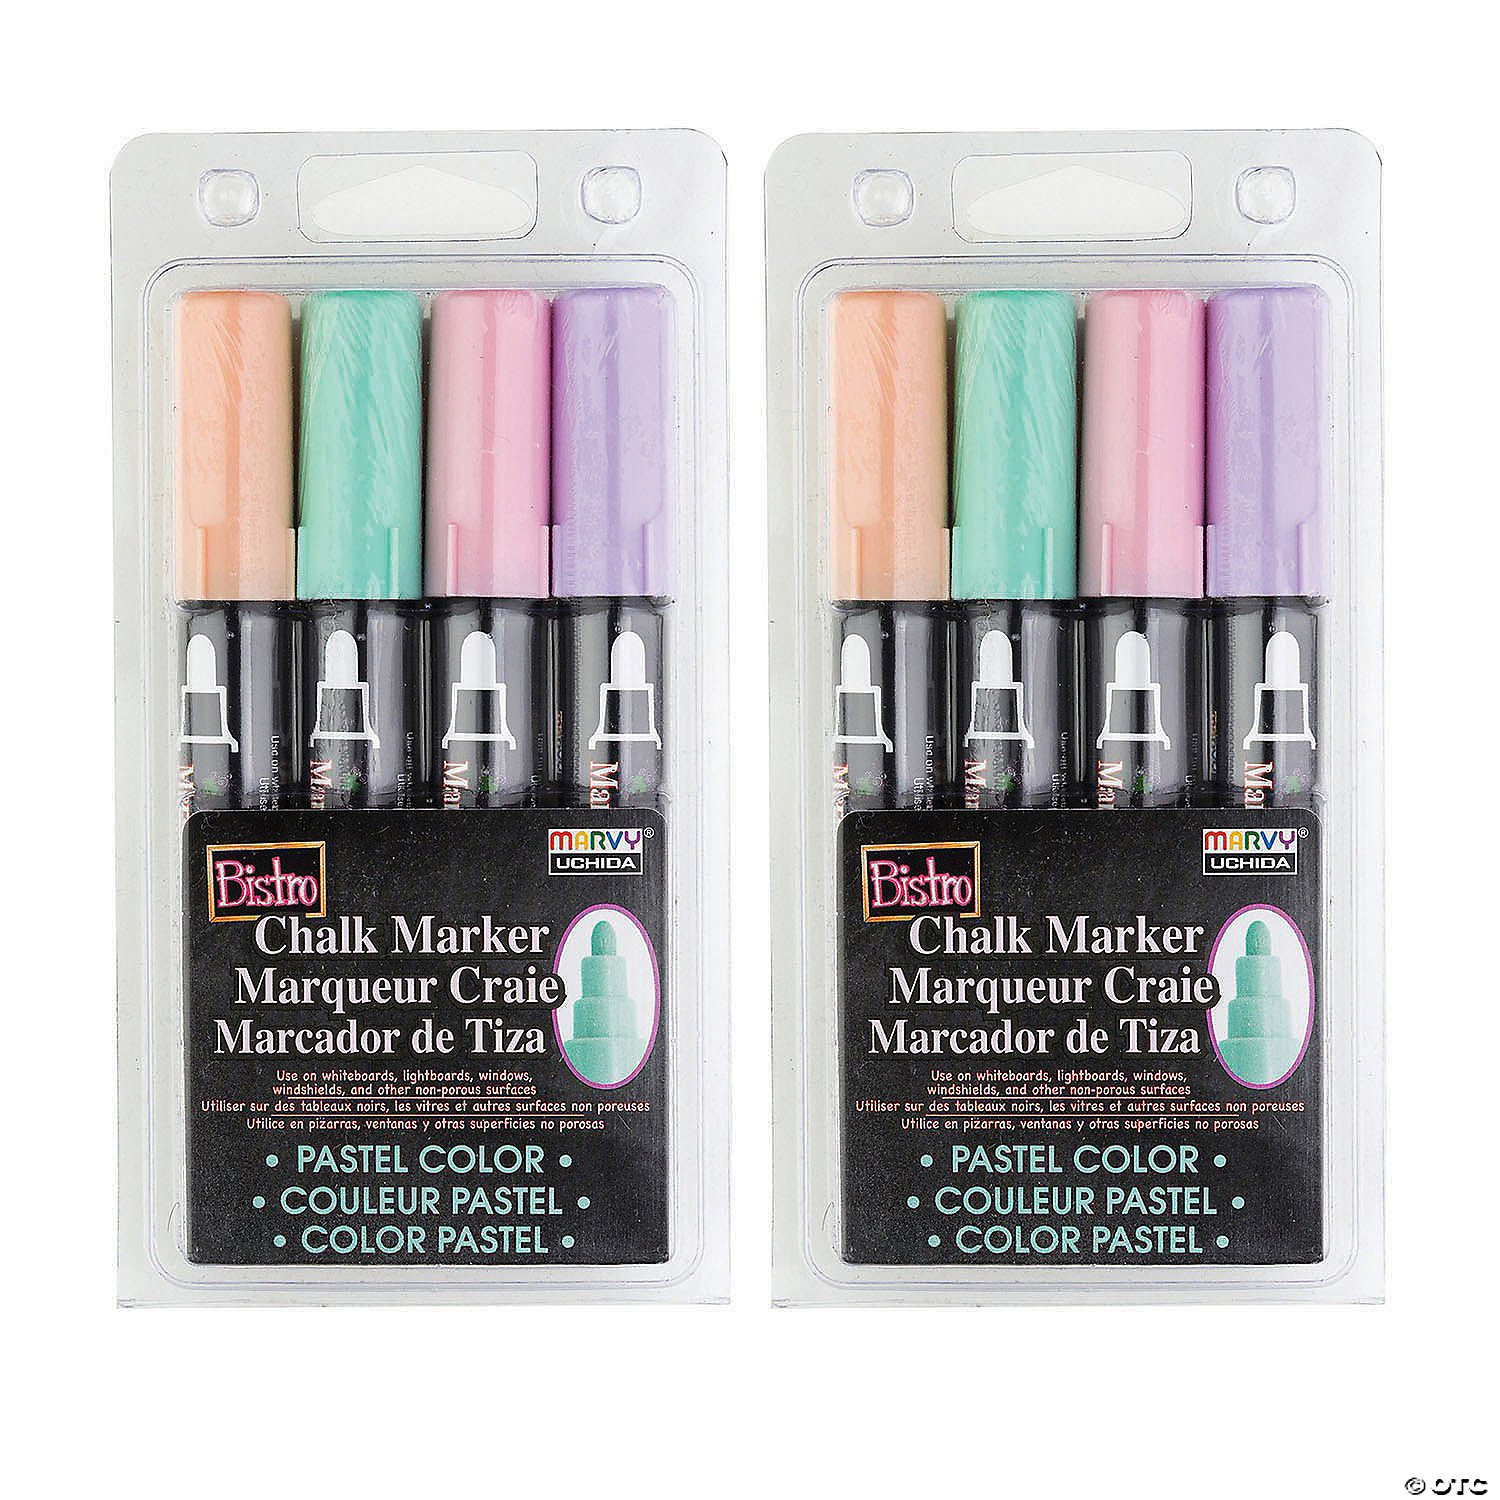 Bazic Washable Markers, Jumbo Classroom Pack, 200 Count, 8 Colors